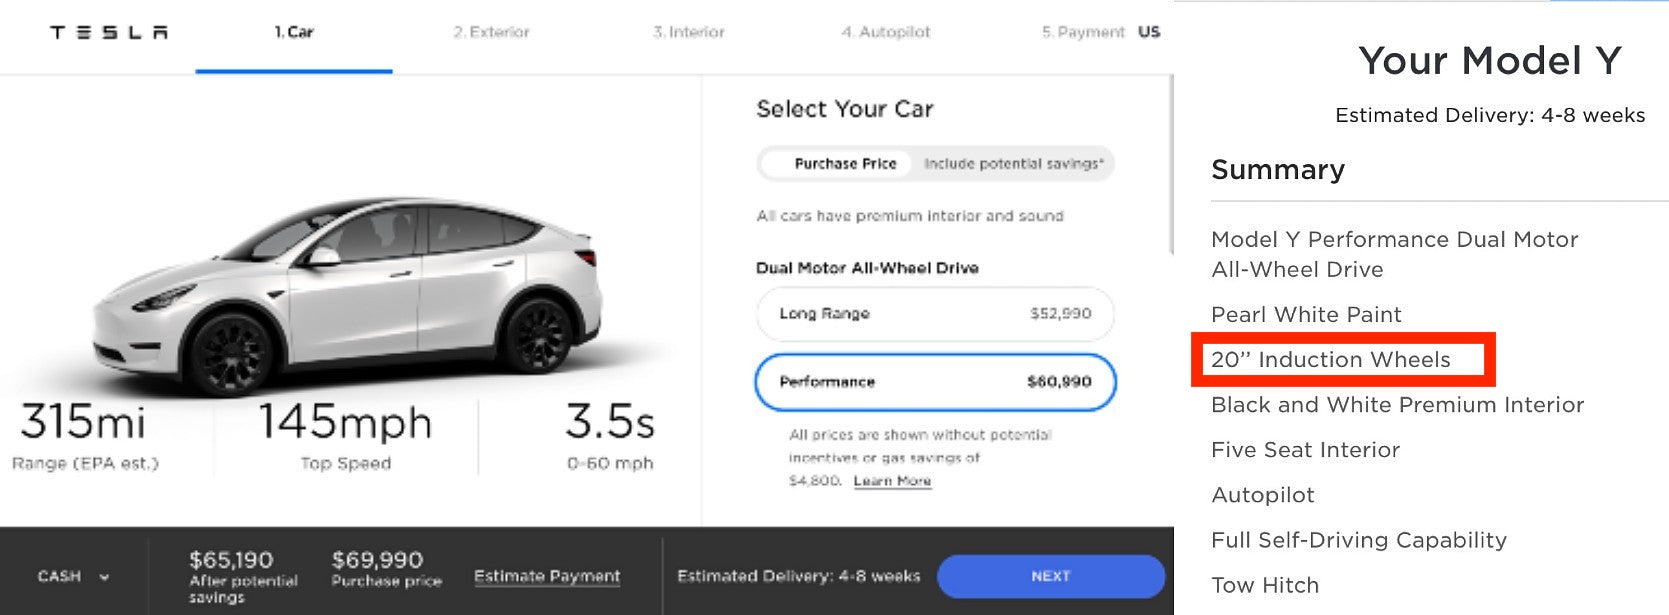 Tesla Model Y Performance With Induction Wheels Now Available & Ready To Deliver